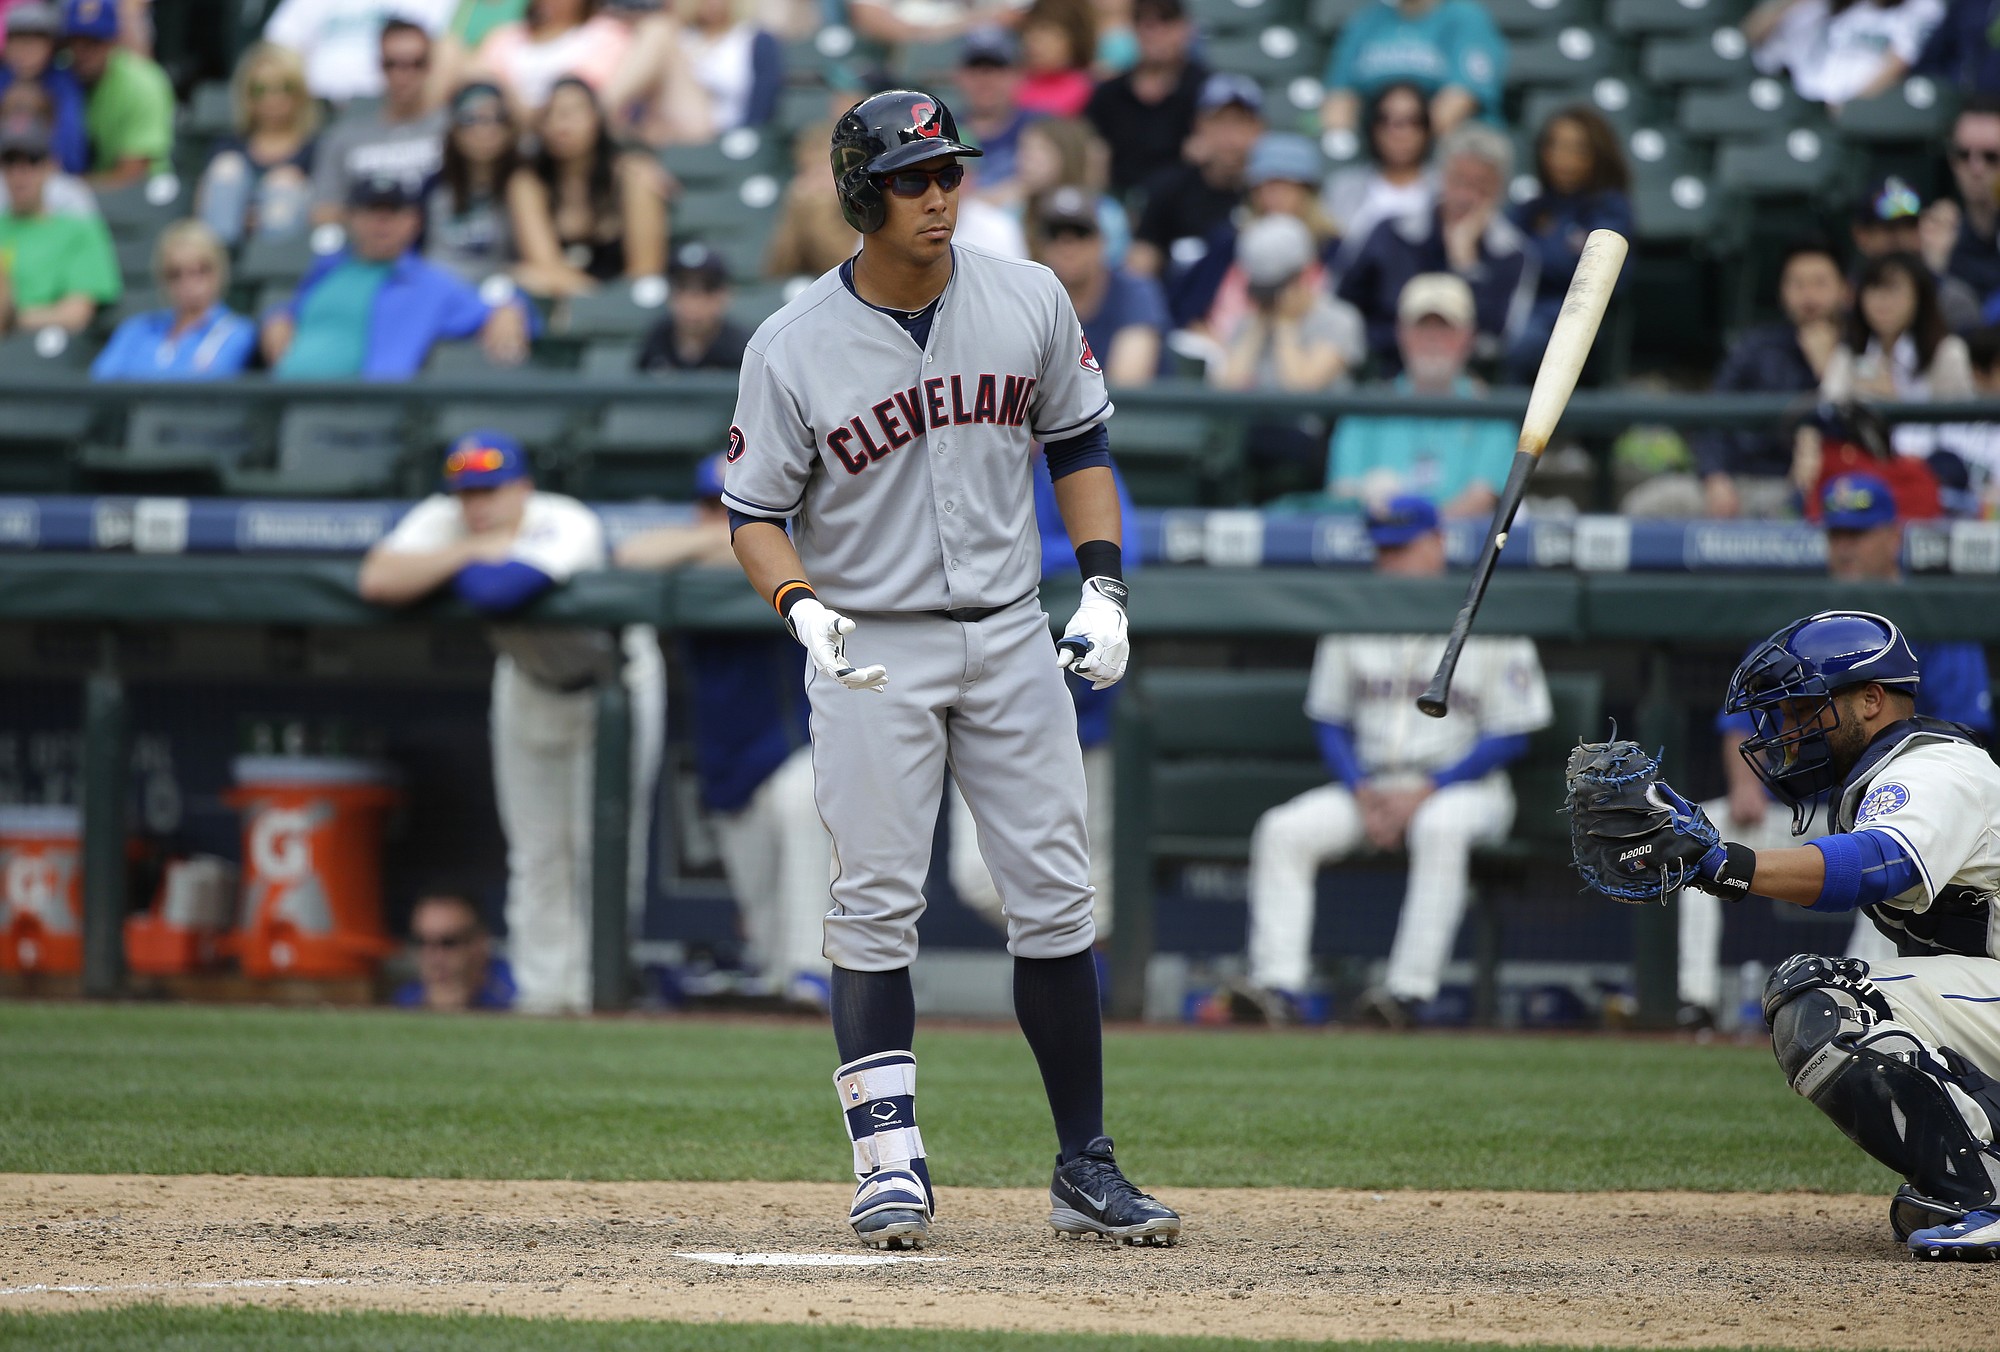 Indians' Michael Brantley running, could play later this week